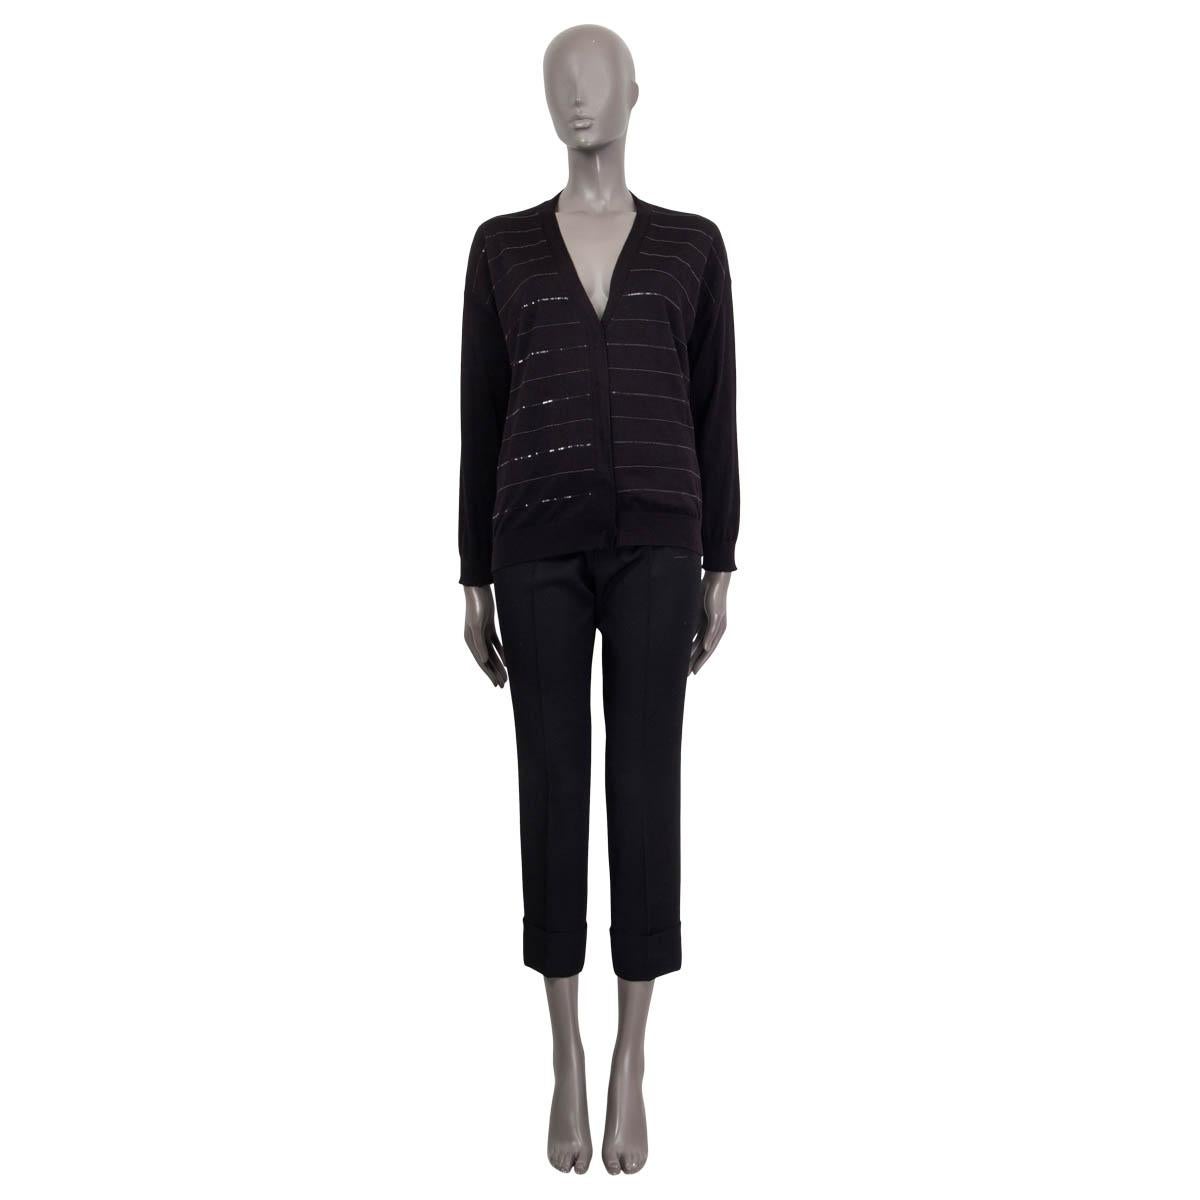 100% authentic Brunello Cucinelli v-neck cardigan in black cashmere (70%) and silk (30%). Features sequin and bead embellished stripes on the front. Closes with five push buttons on the front. Unlined. Has been worn and is in excellent